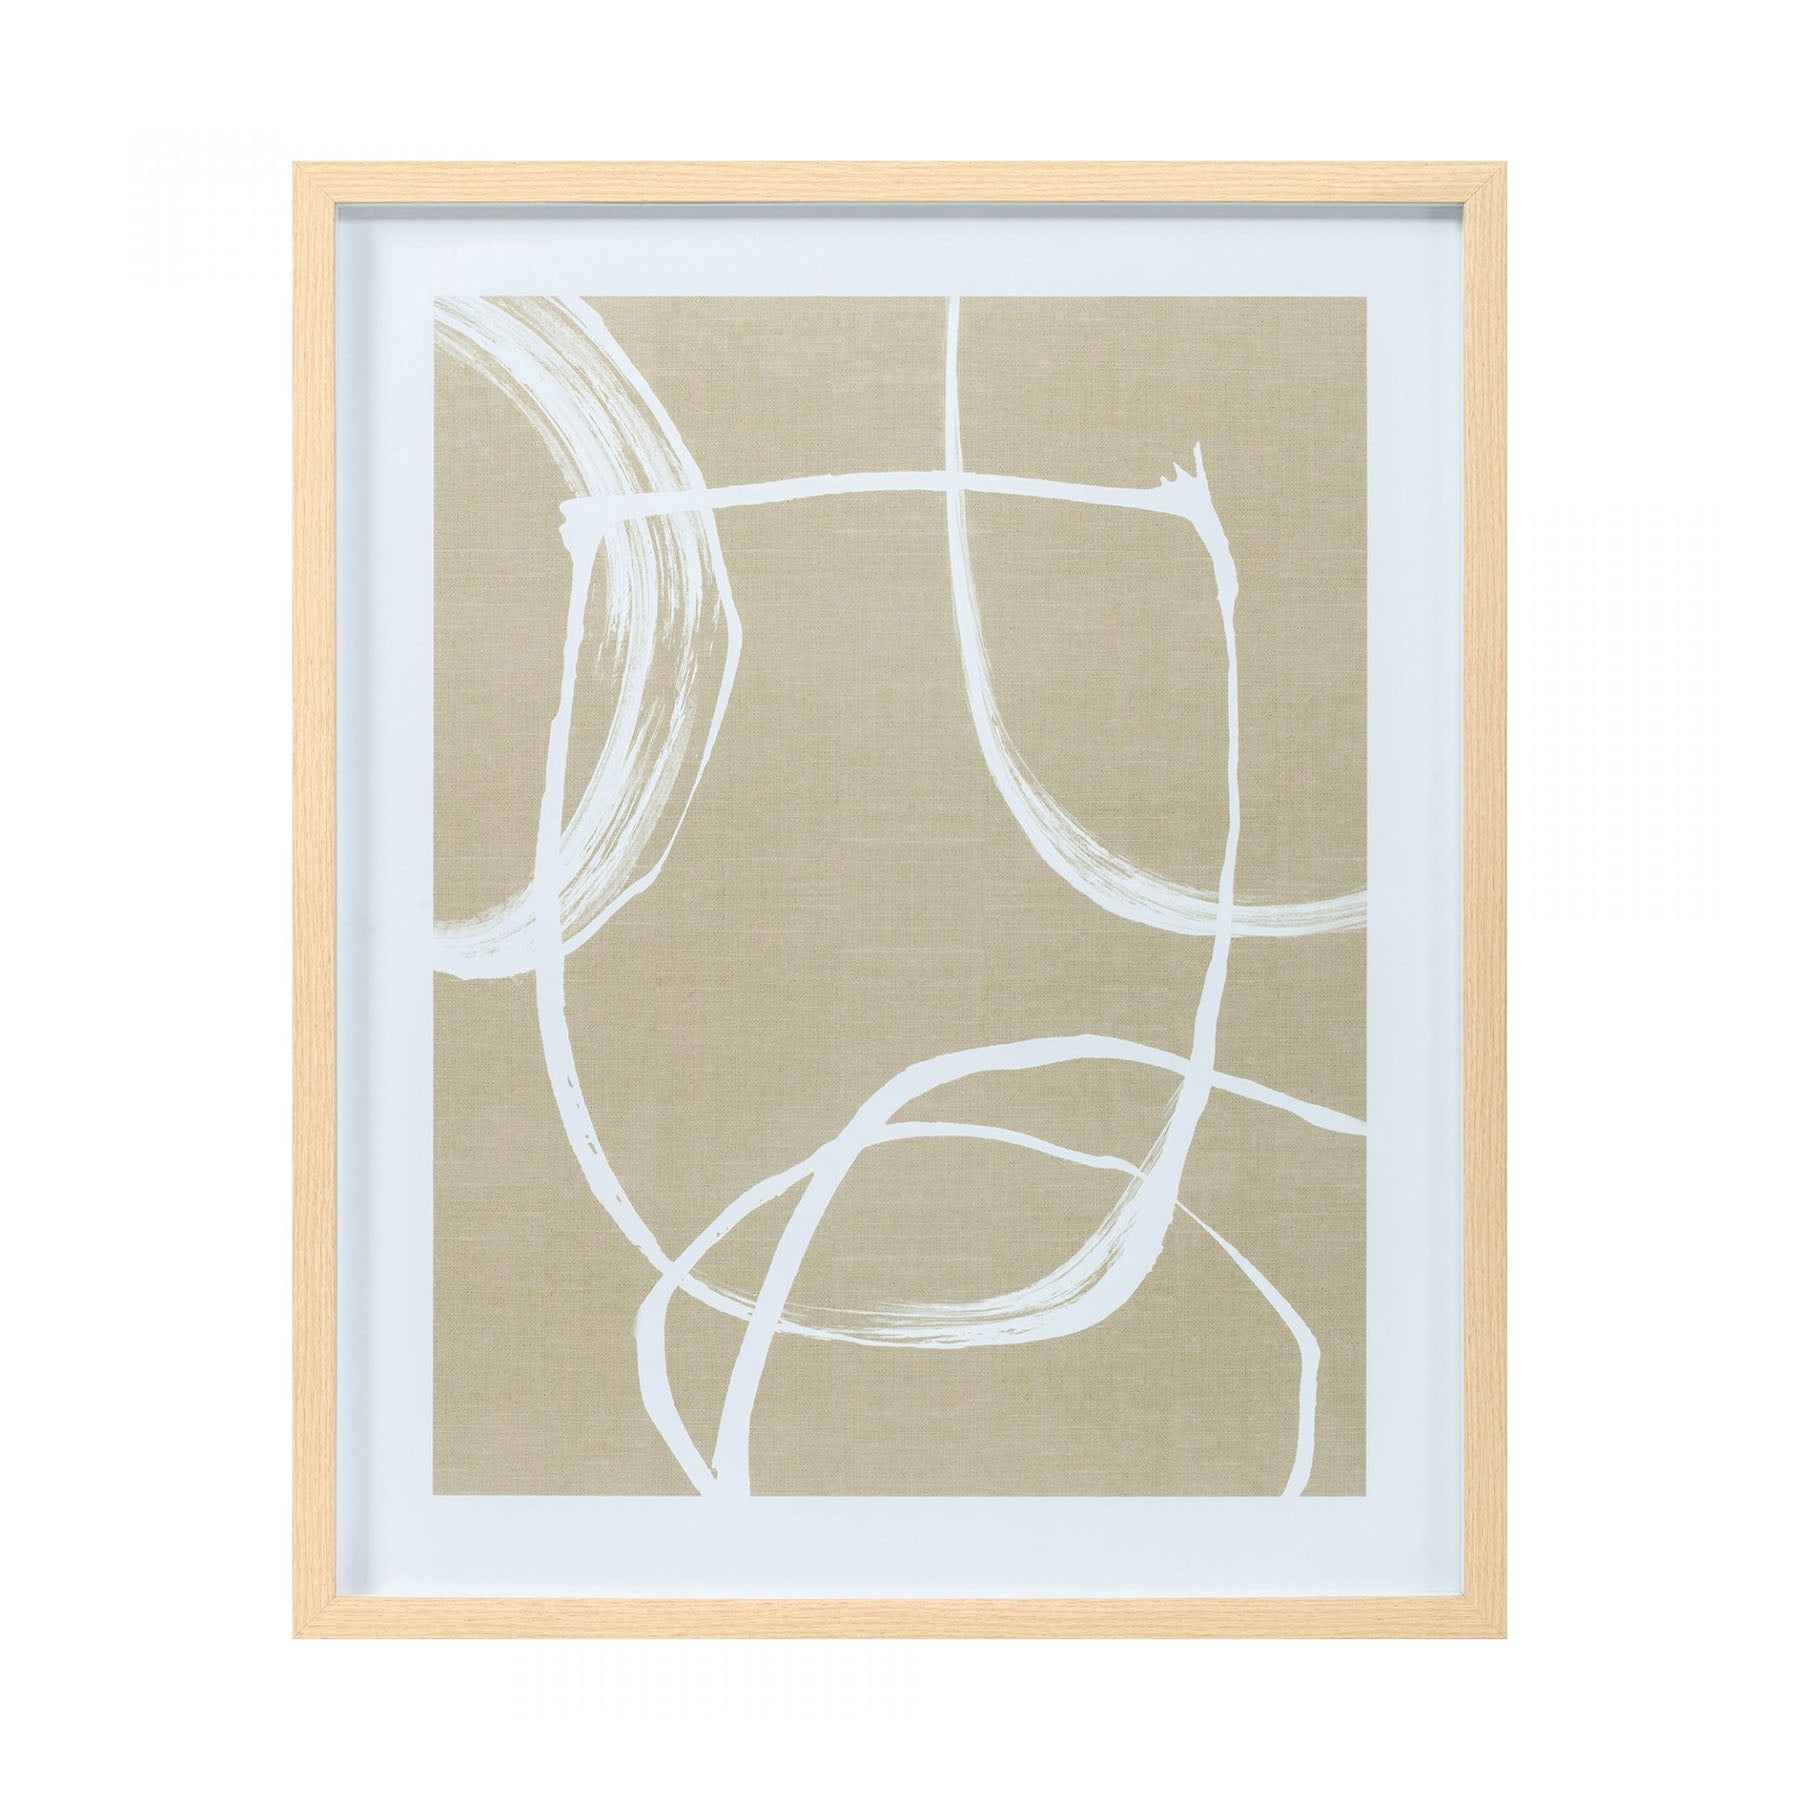 Abstract art decor perfect for home